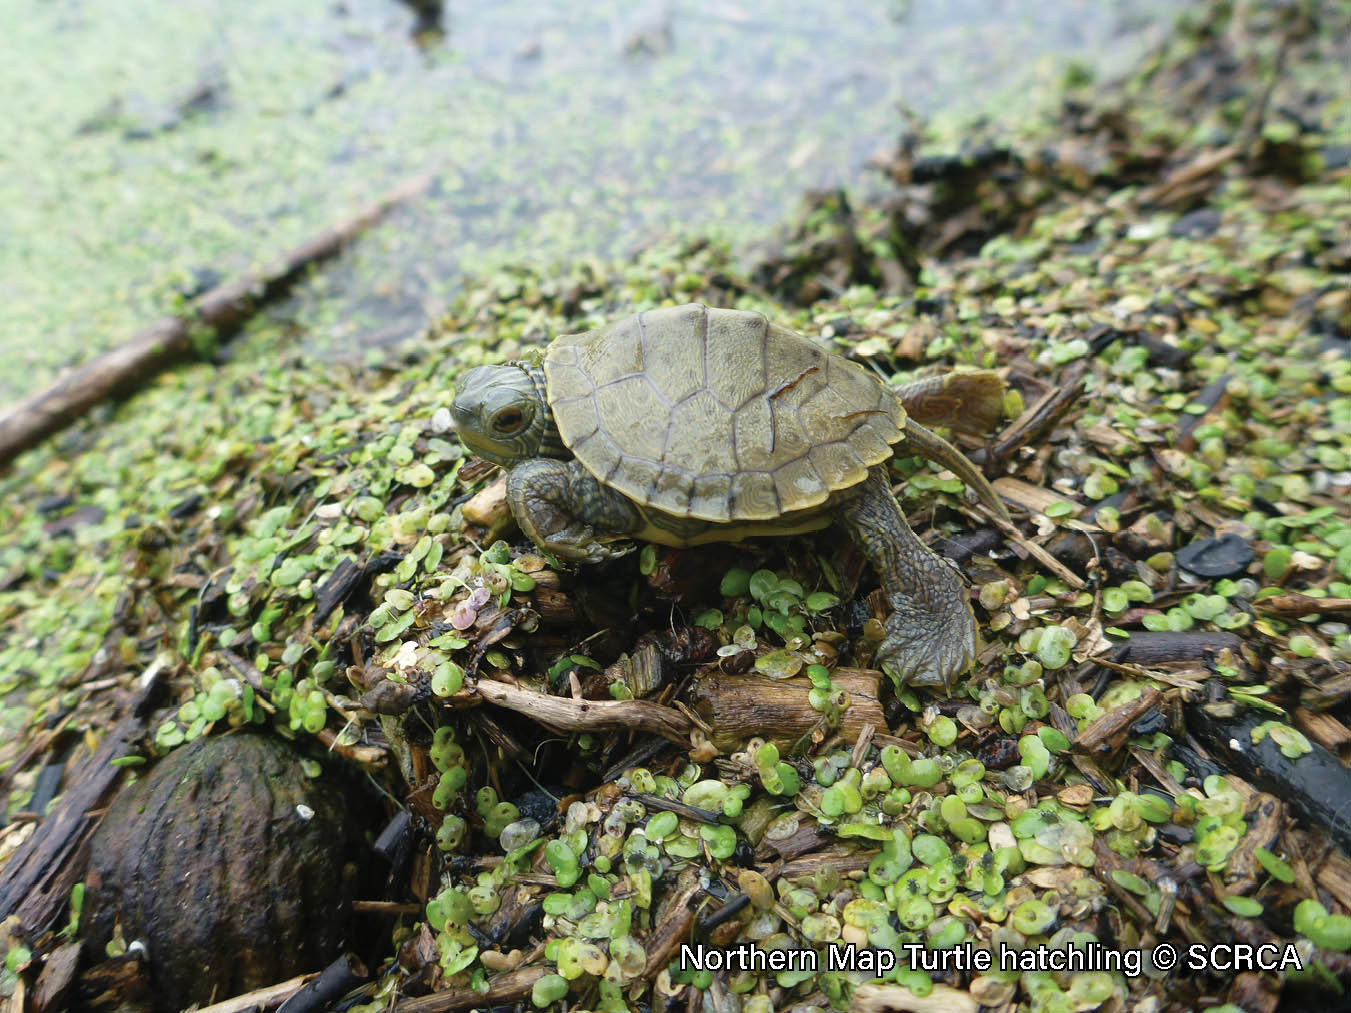 Picture of a Northern Map Turtle hatchling on a riverbank. The turtle has a brown shell with a yellow contour line pattern, a ridge down the midline of its shell, and the back edge is serrated. It has yellow lines on its neck and a yellow spot behind its eye.